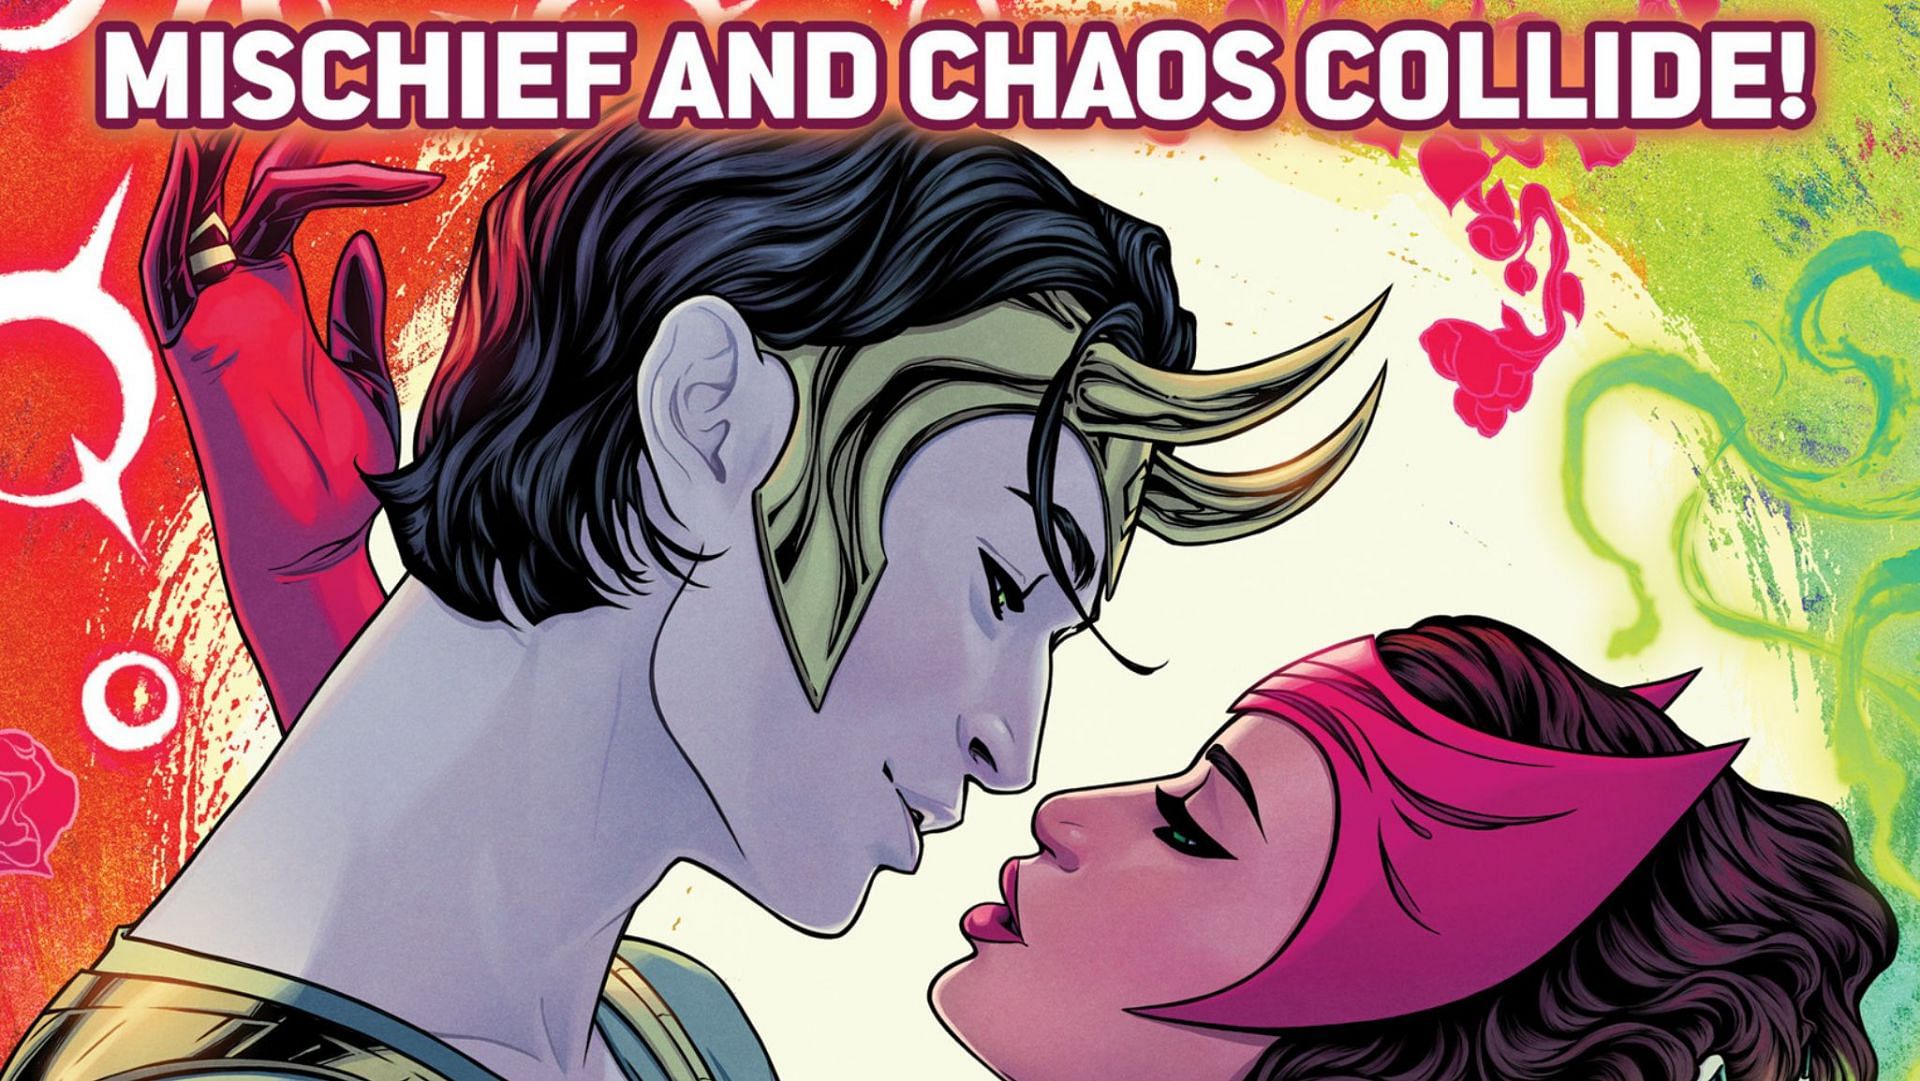 Love in the air: Loki and Scarlet witch teeter on the edge of romance (Image via Marvel Comics)